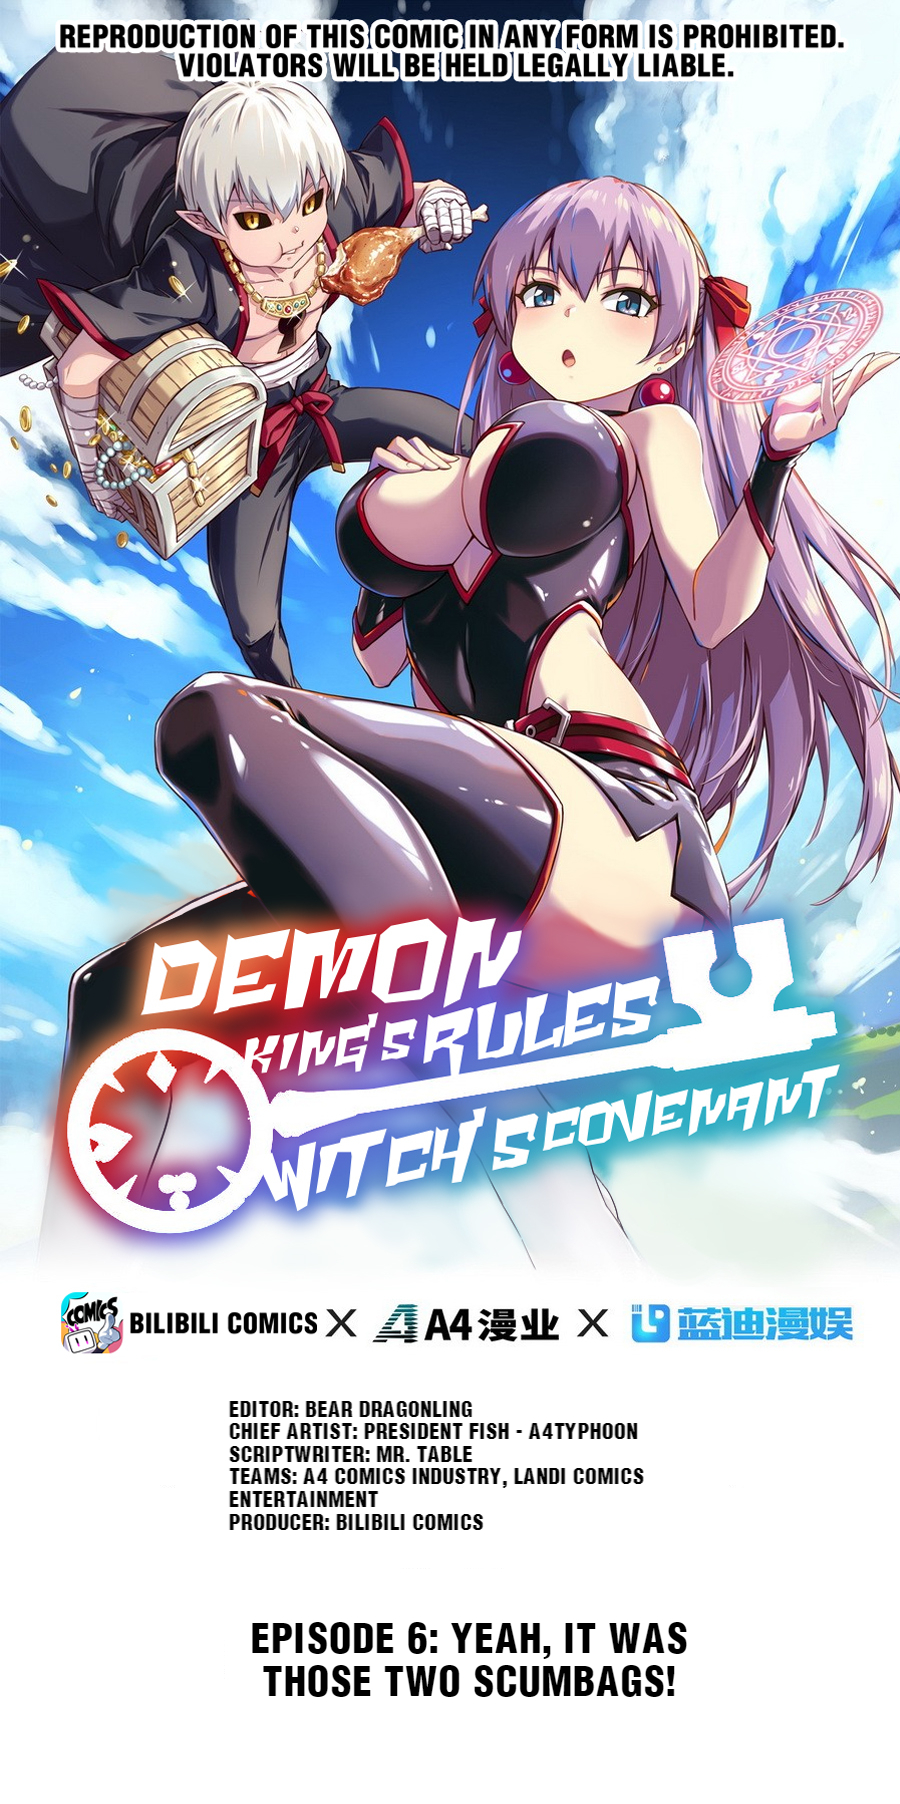 Demon King's Rules X Witch's Covenant Vol.1 Chapter 6